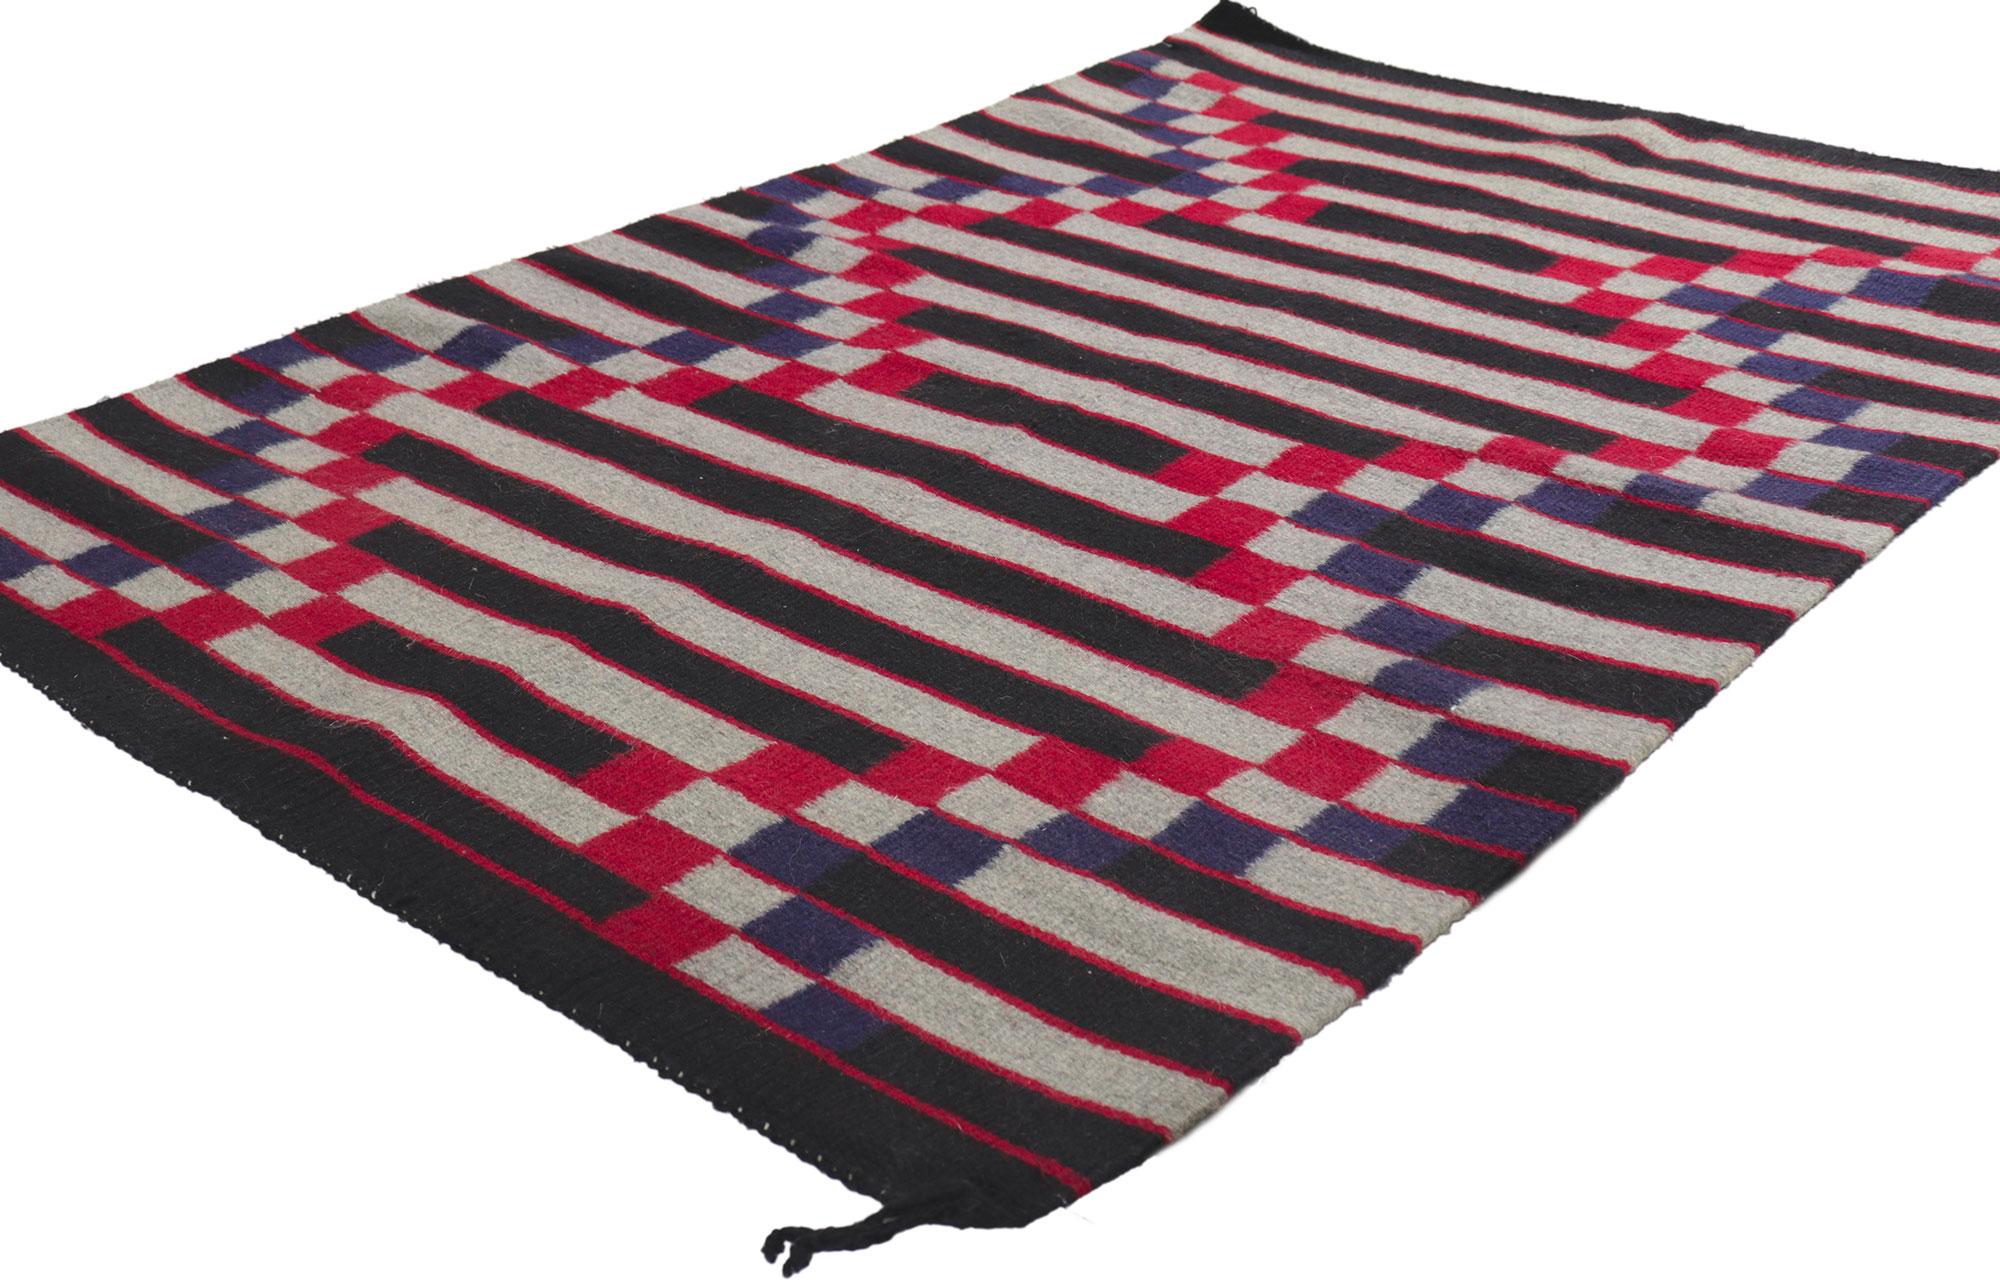 78423 Vintage Navajo Rug, 03'03 x 05'01. With its incredible detail and texture, this handwoven Navajo rug is a captivating vision of woven beauty. The eye-catching striped pattern and lively colorway woven into this Navajo blanket work together